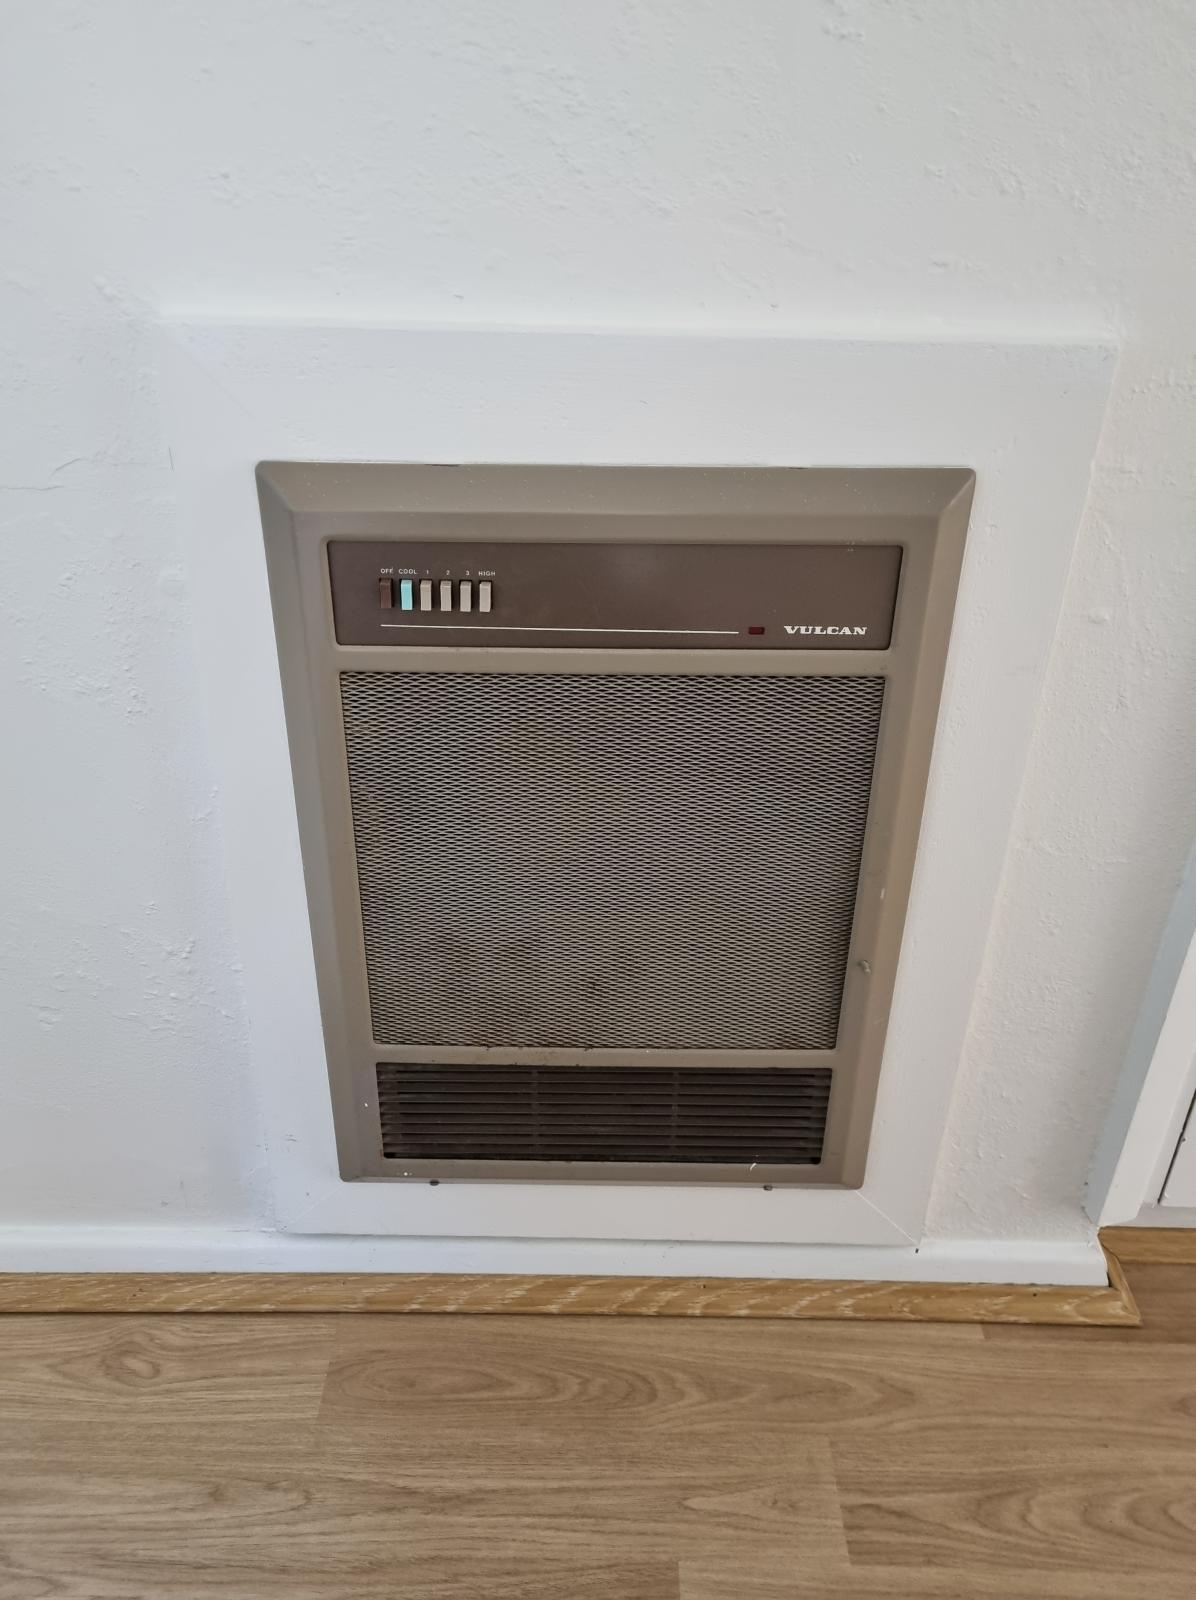 Do I need an electrician to remove this wall heater?